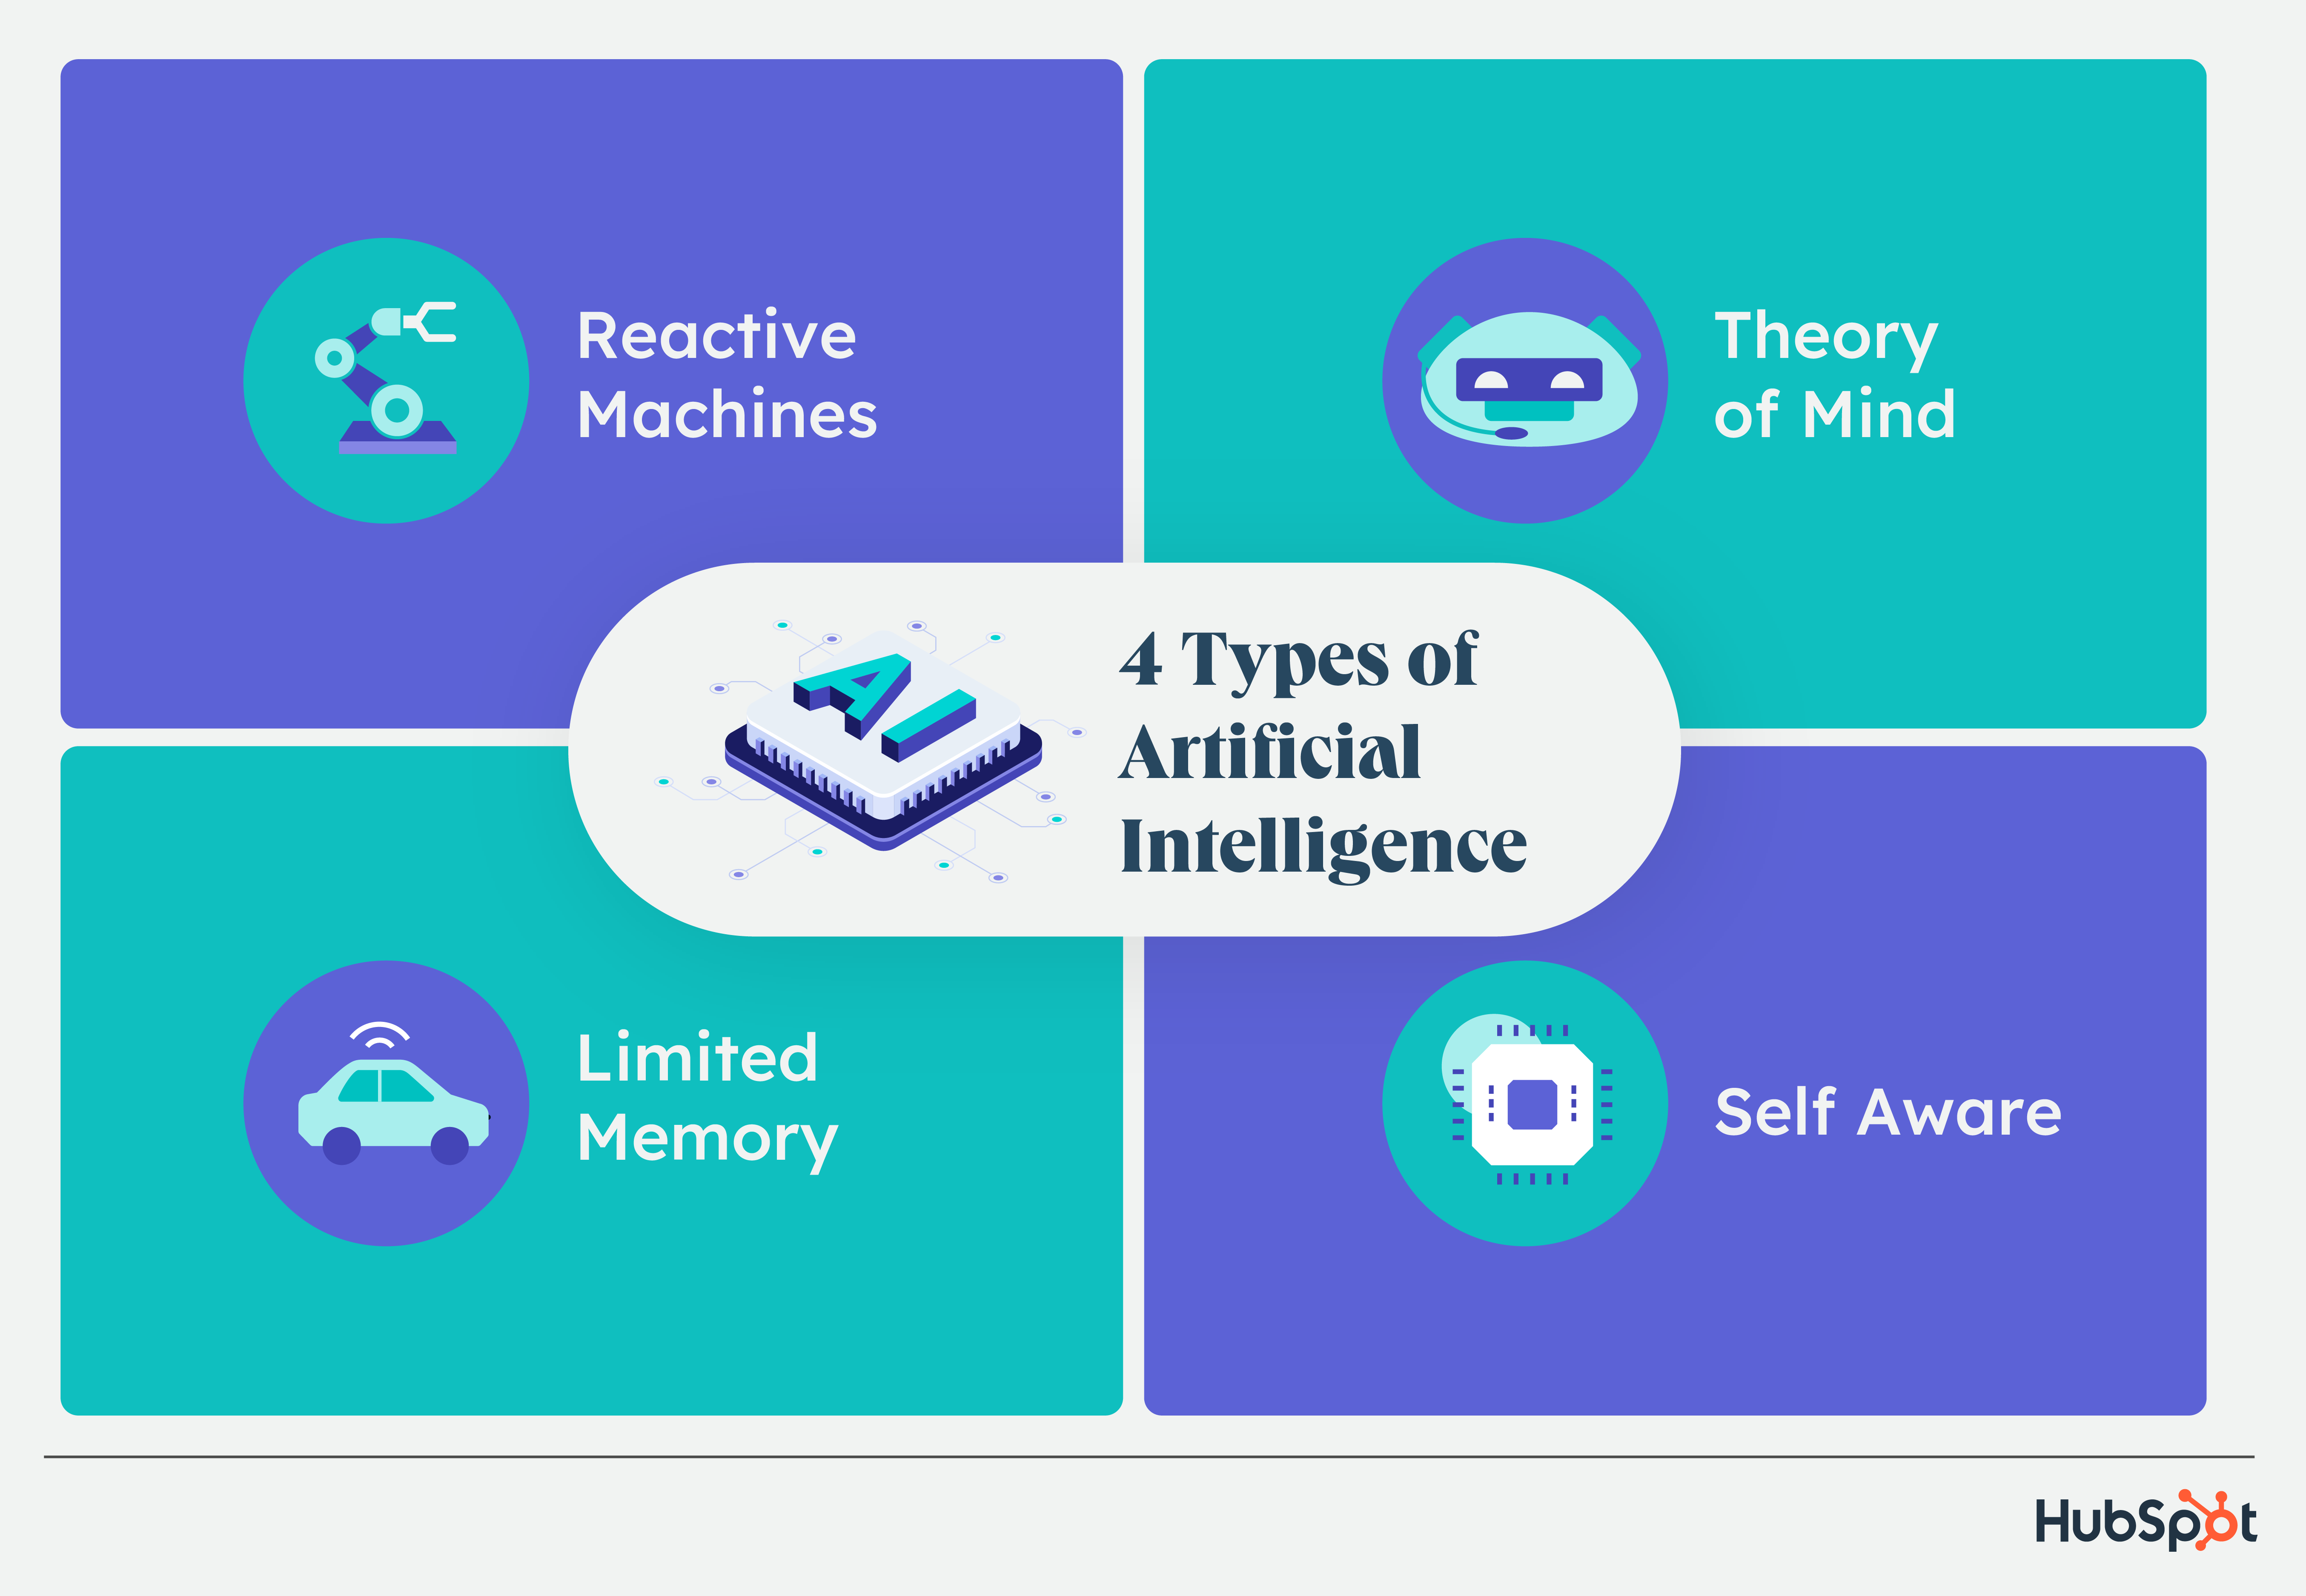 4 Types of AI: Reactive Machines, Limited Memory, Theory of Mind, and Self-Aware